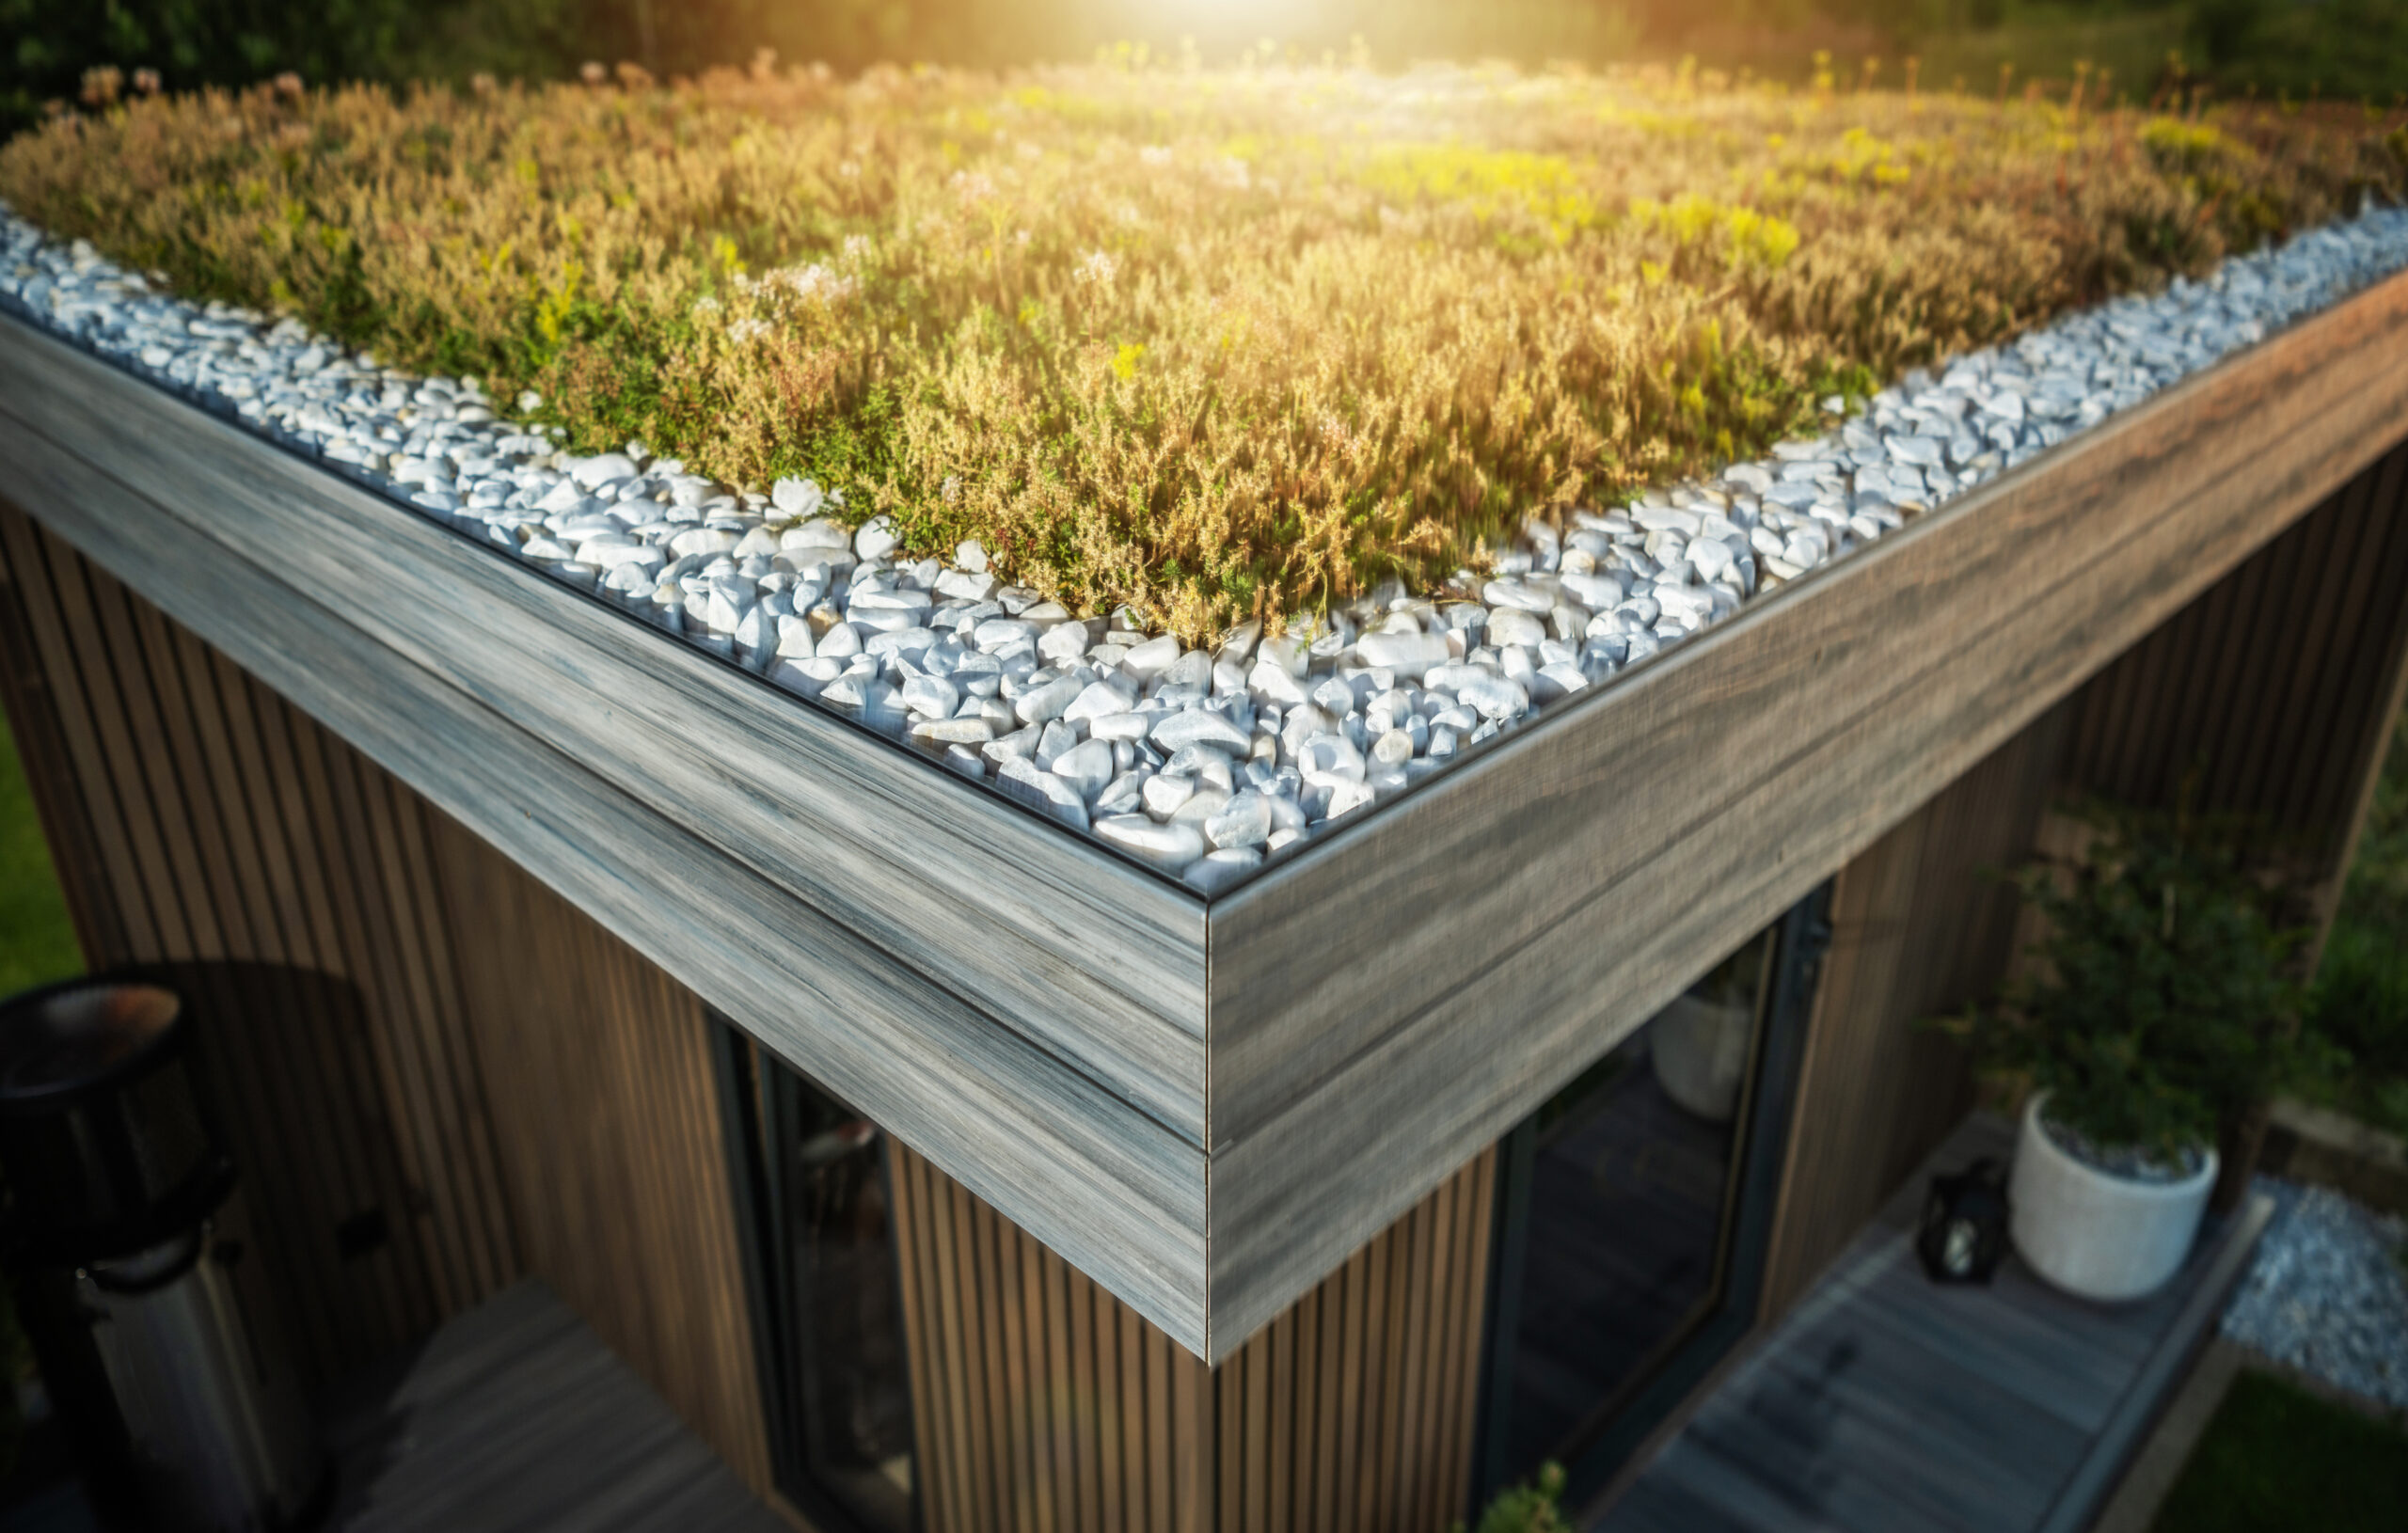 Green roof innovations in roofing